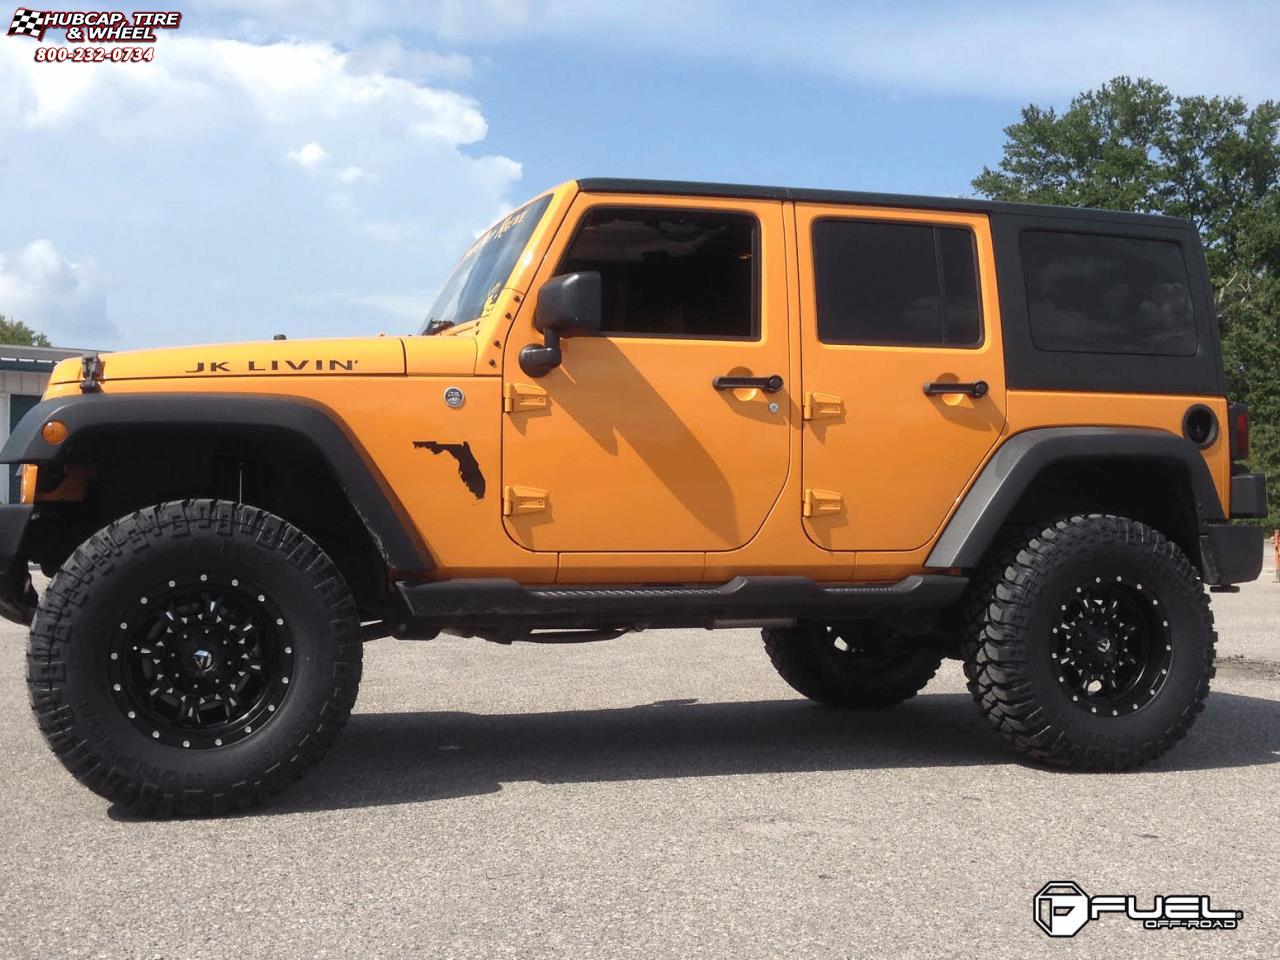 vehicle gallery/jeep wrangler fuel krank d517 17X9  Matte Black & Milled wheels and rims